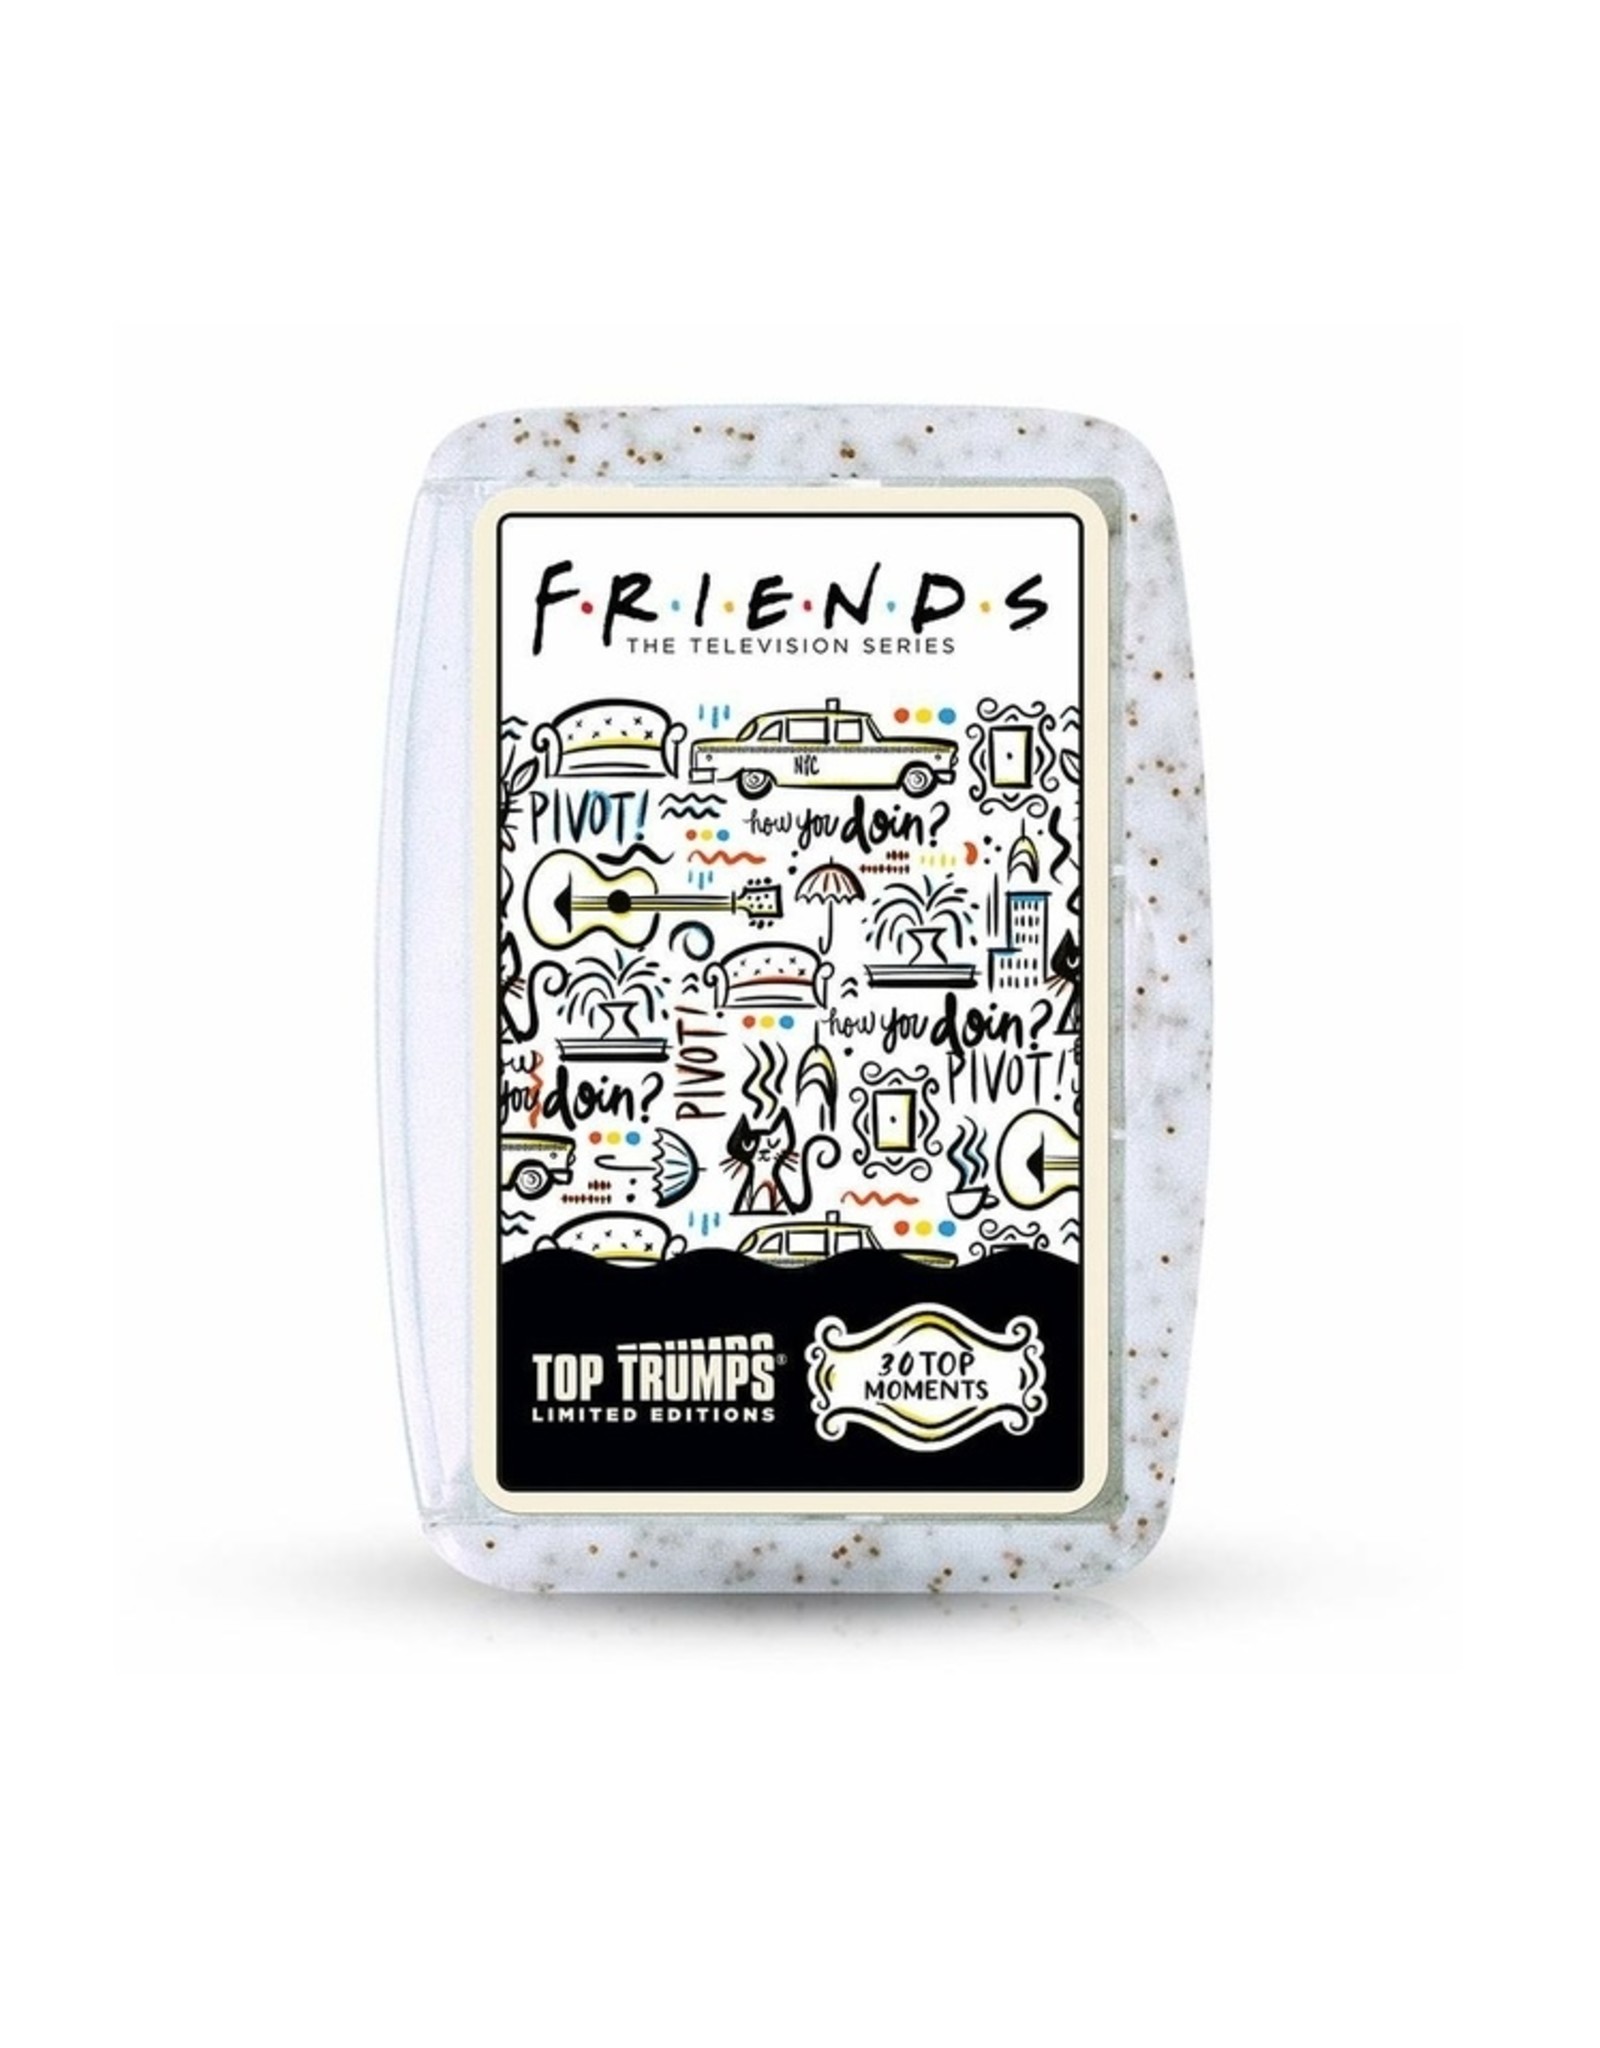 Top Trumps Top Trumps - Limited Edition - Friends Series - Card Game